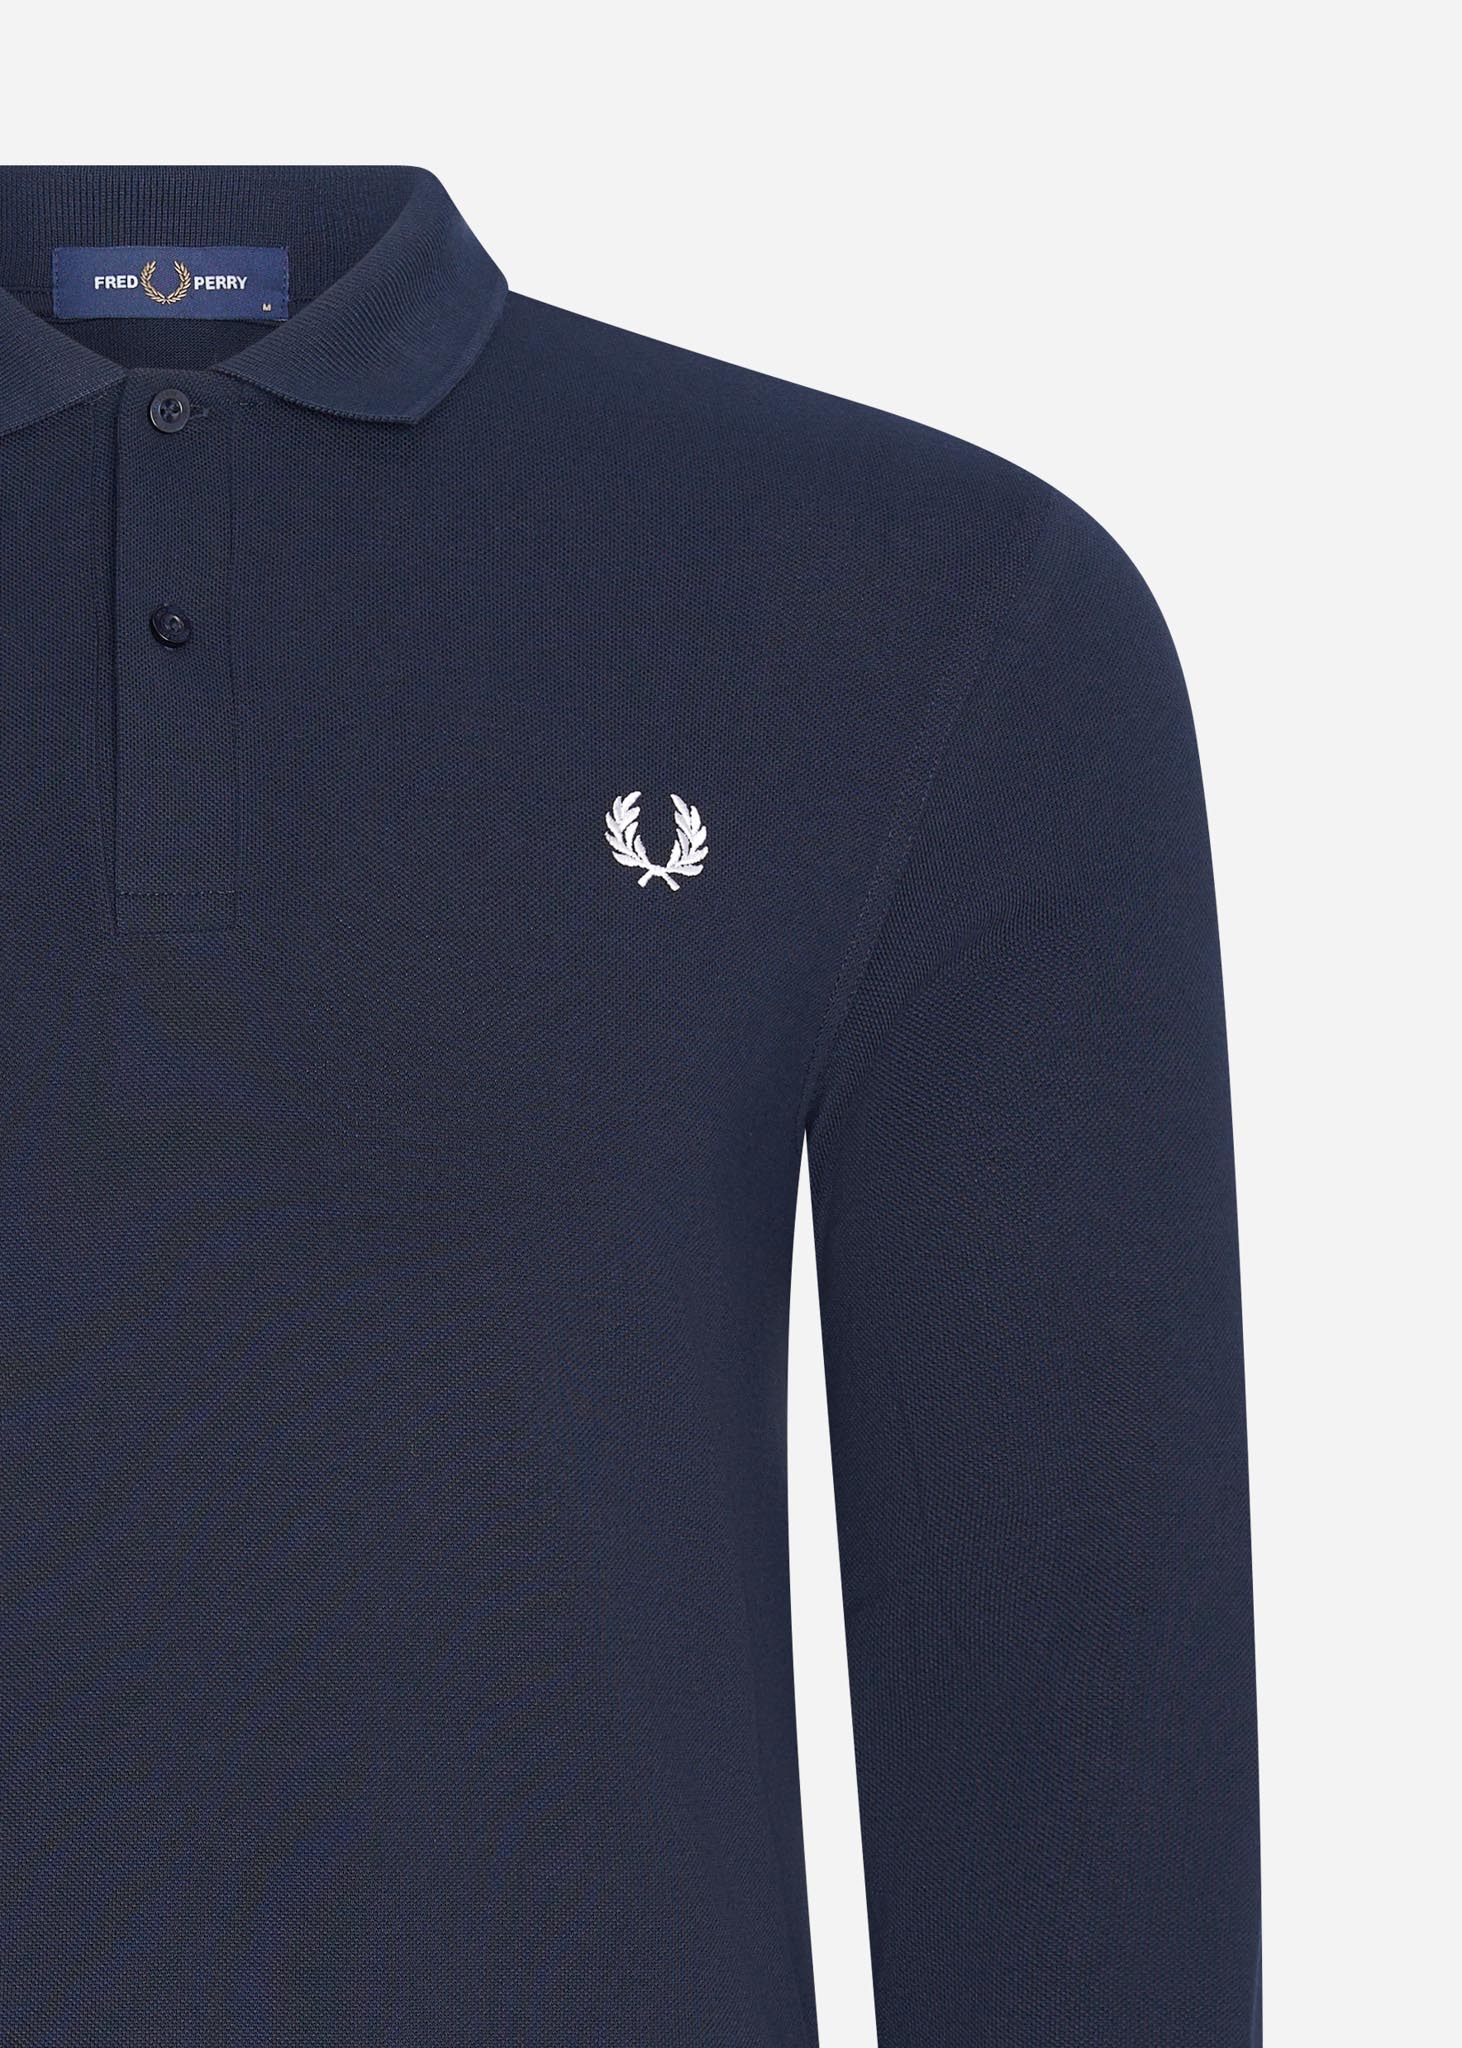 Fred Perry long sleeve polo navy